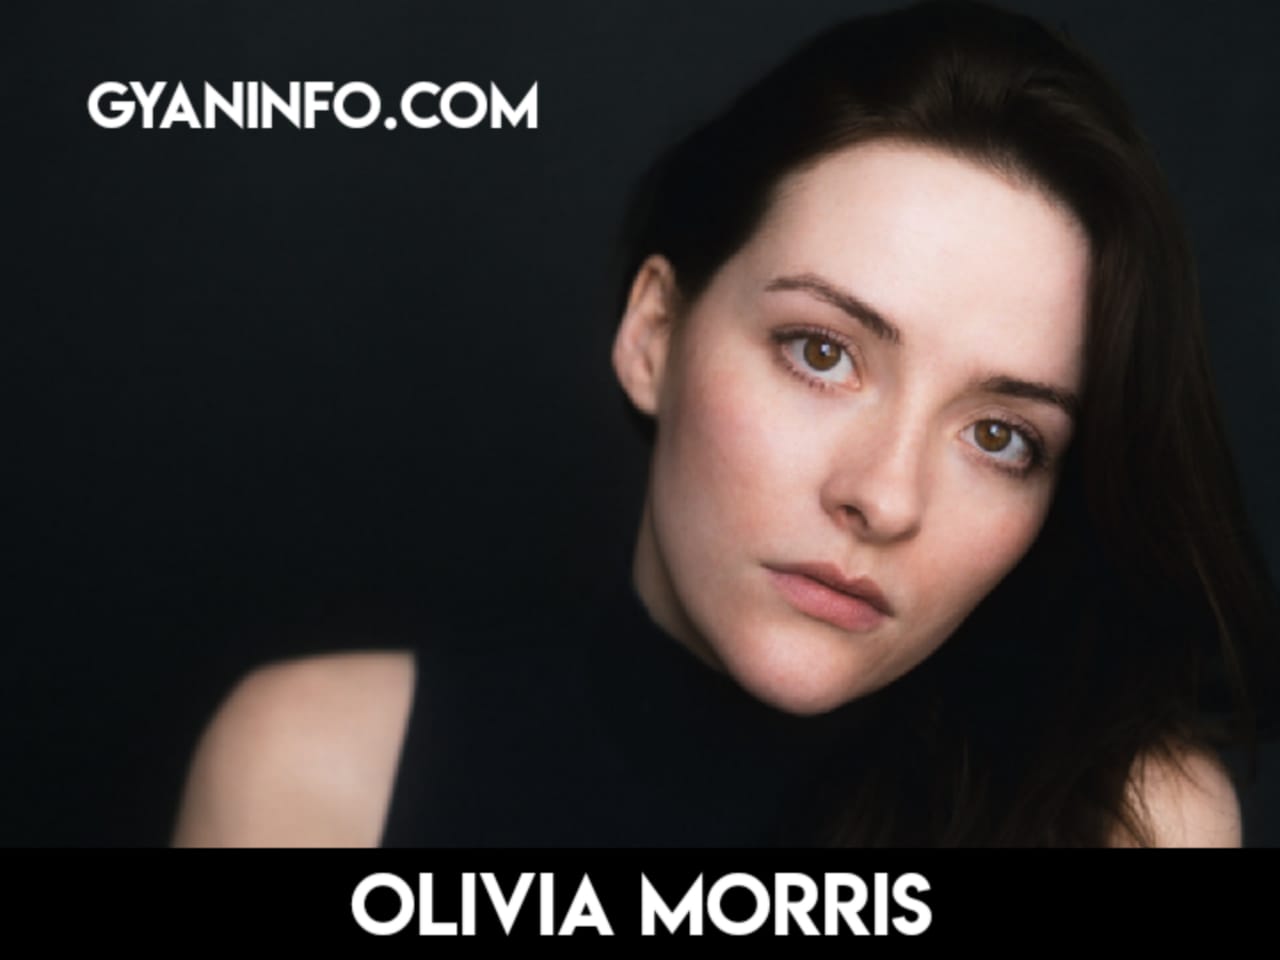 Olivia Morris Biography, Height, Age, Weight, Body Measurements, Boyfriend, Family, Parents, Net Worth, Wiki & More